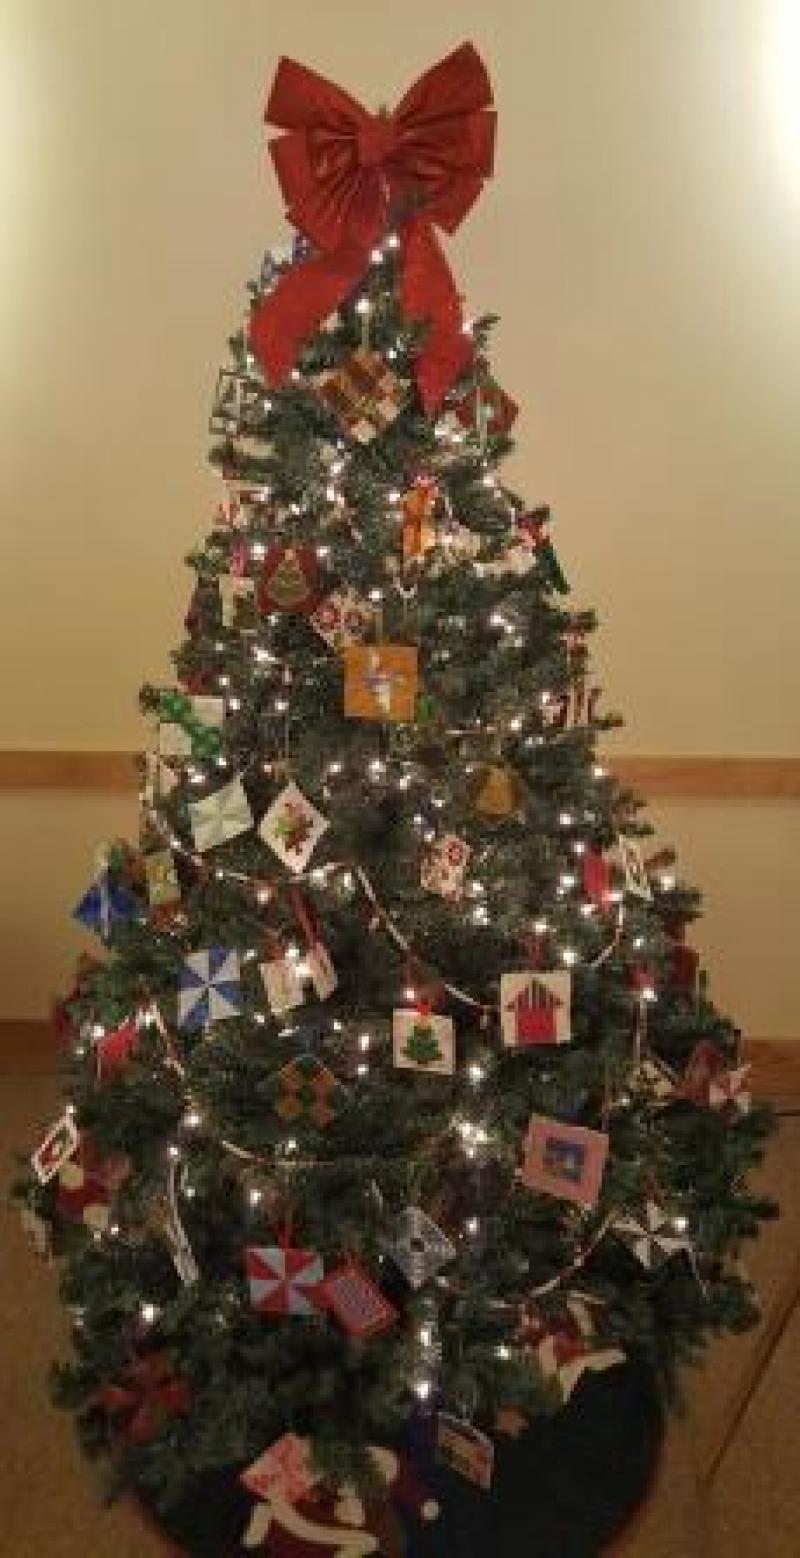 Thanks to everyone for making an ornament, and for the gals who decorated the tree!